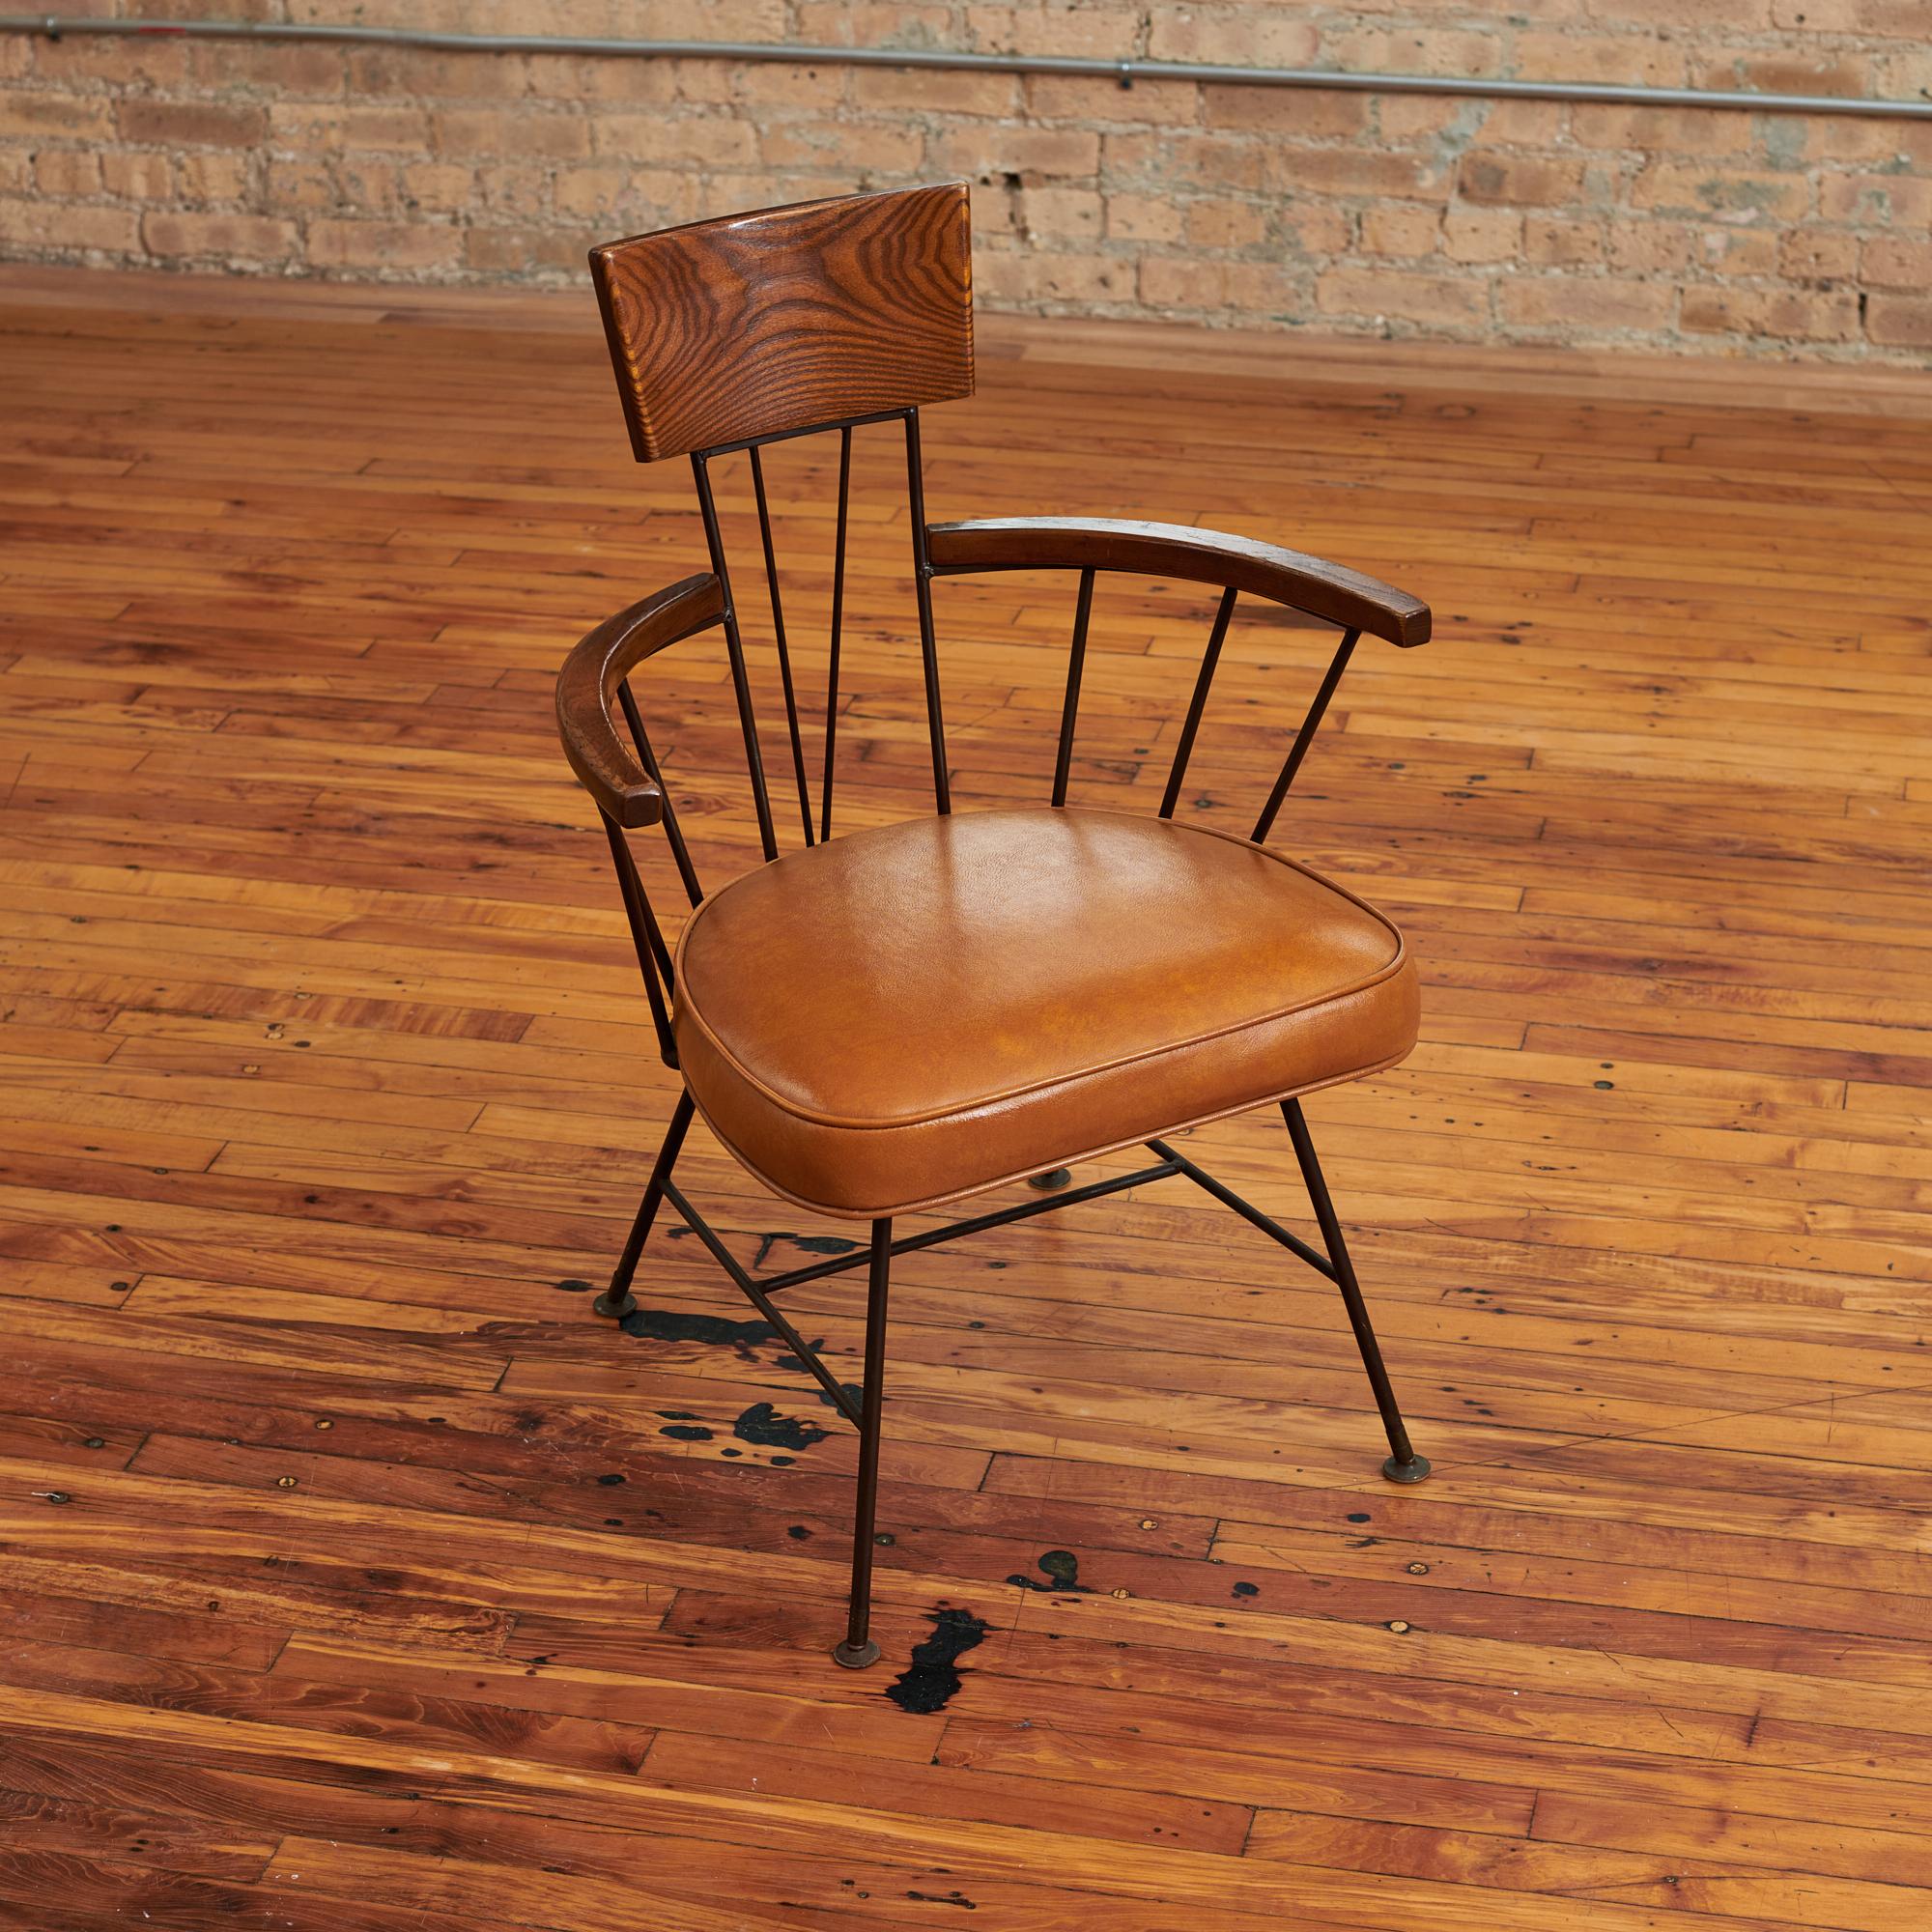 Beautiful set of 6 dining chairs designed by Richard McCarthy for Selrite. These Circa 1950s chairs consist of an iron frame with brown vegan leather cushion and wooden armrests. Chairs are in great condition with wear consistent with age and use.